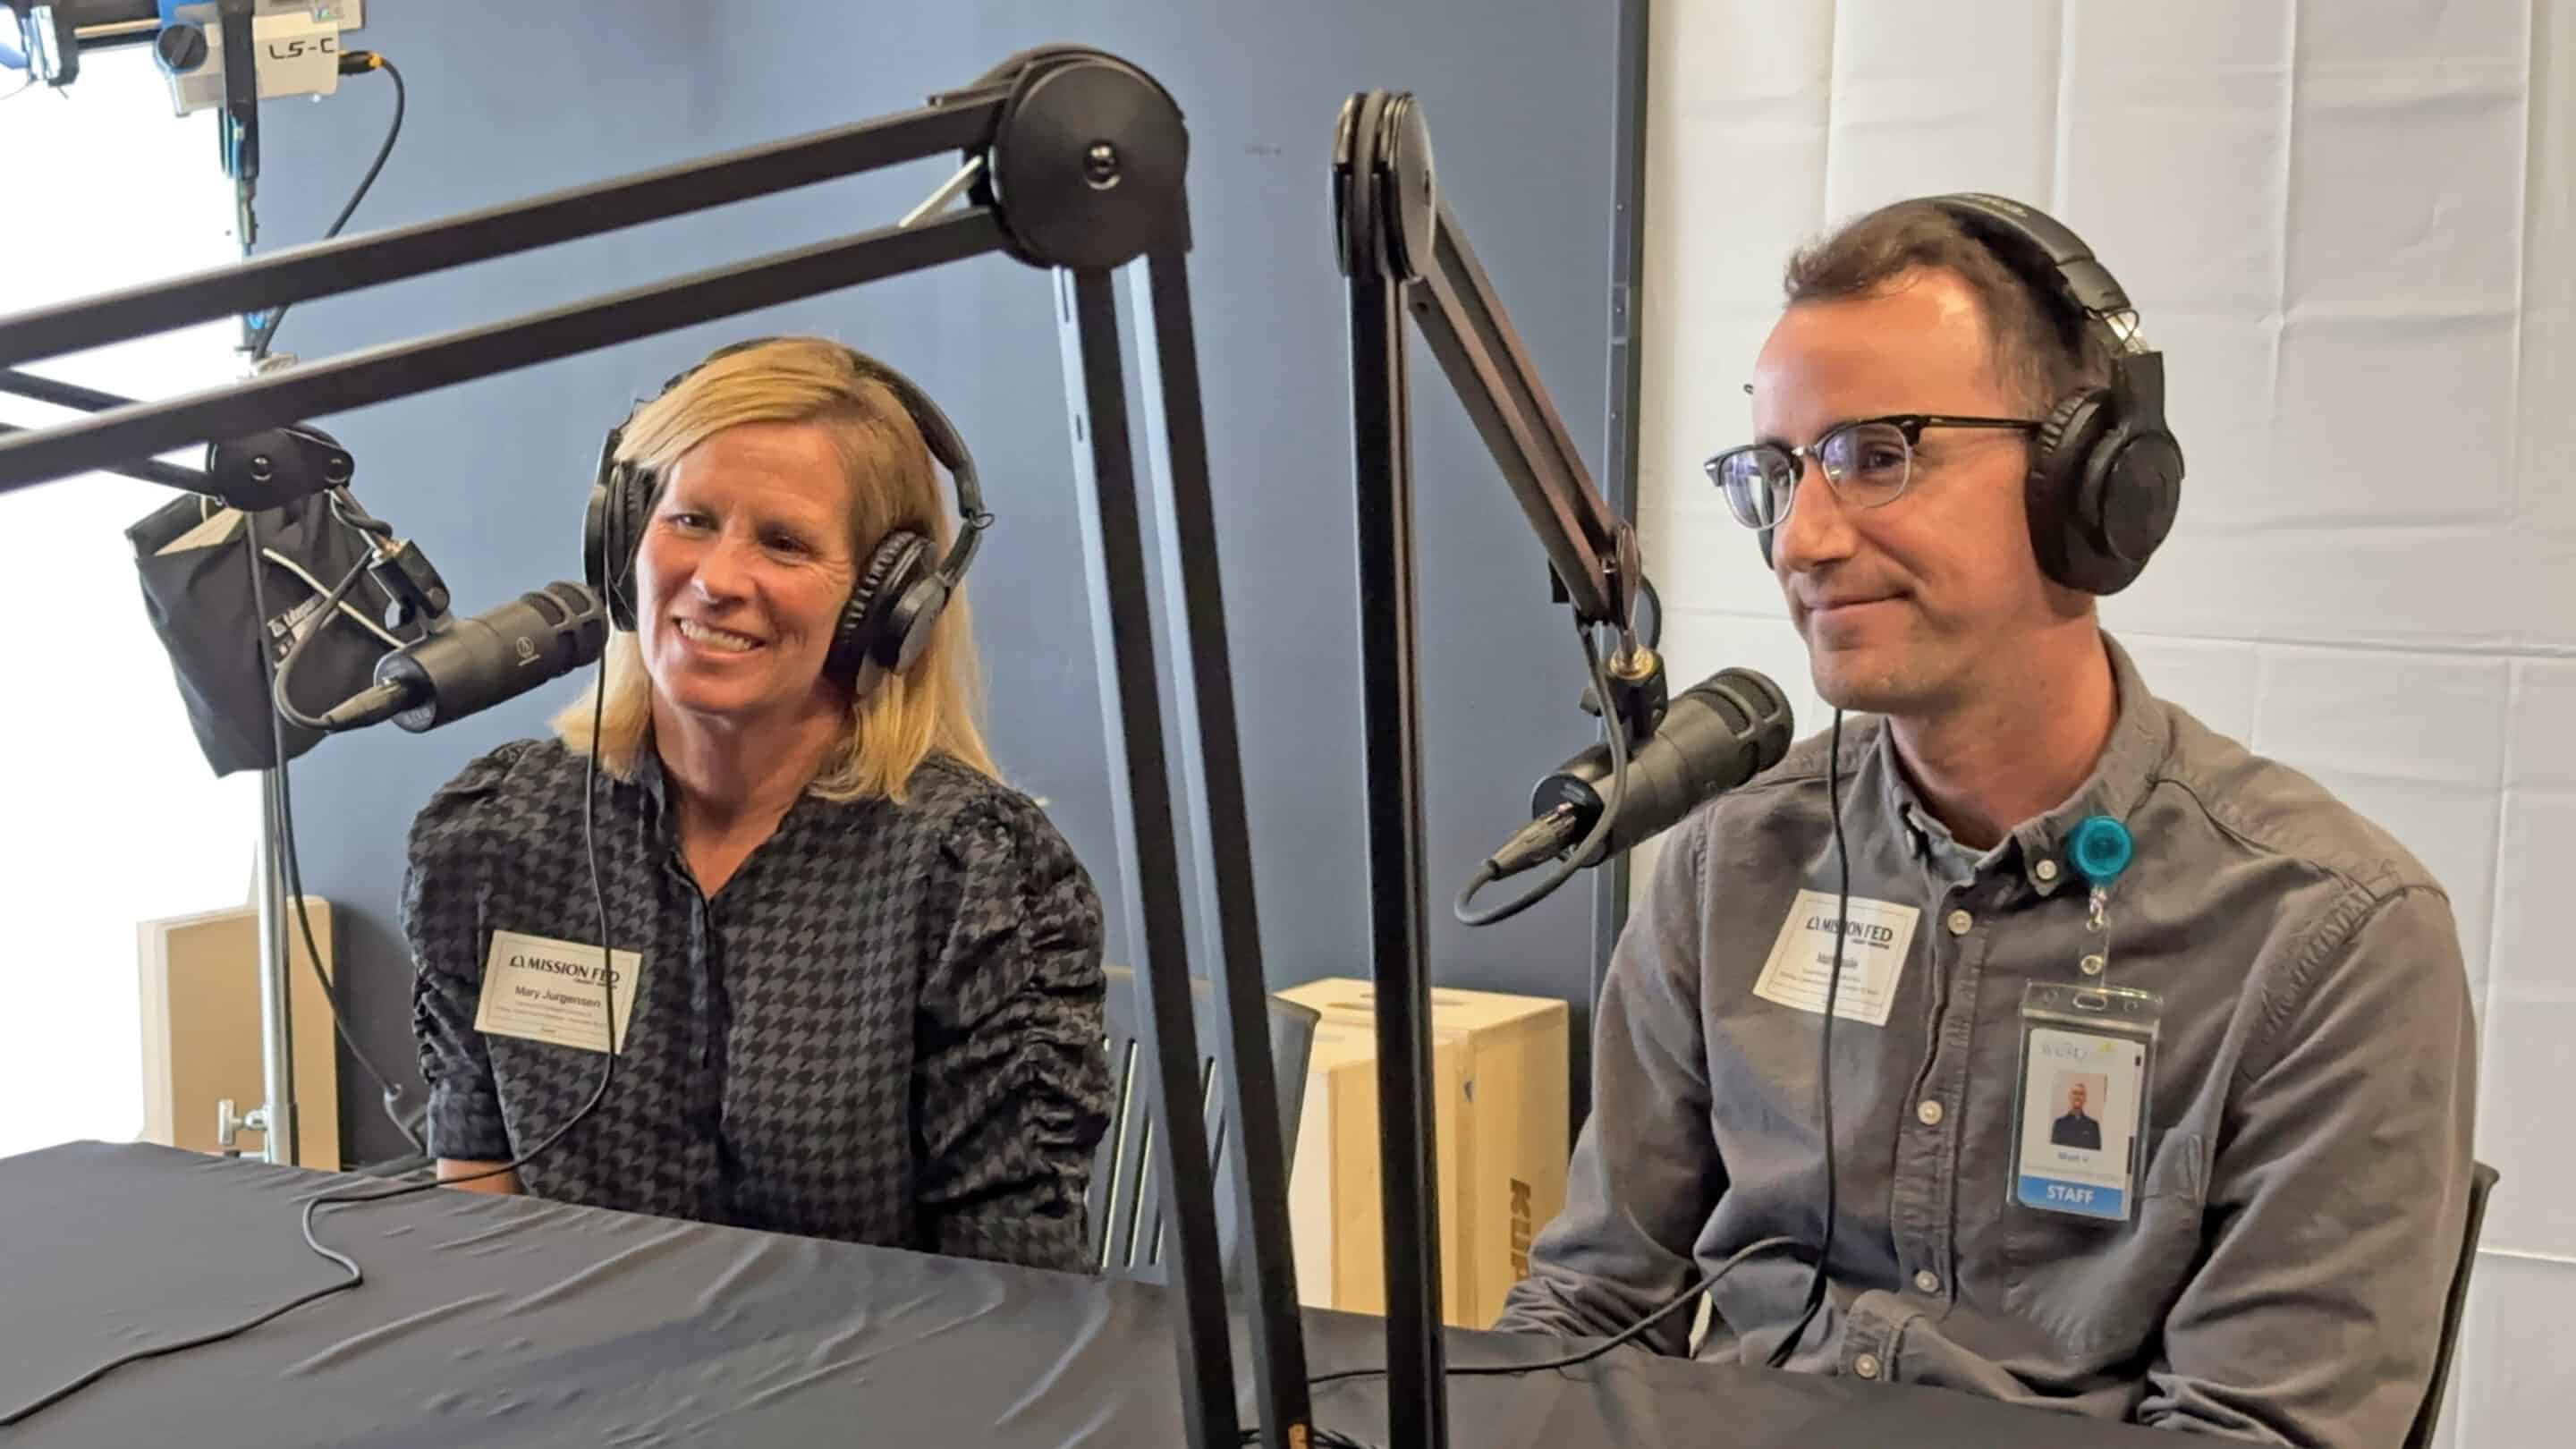 Gary and Mary West PACE team during the podcast interview